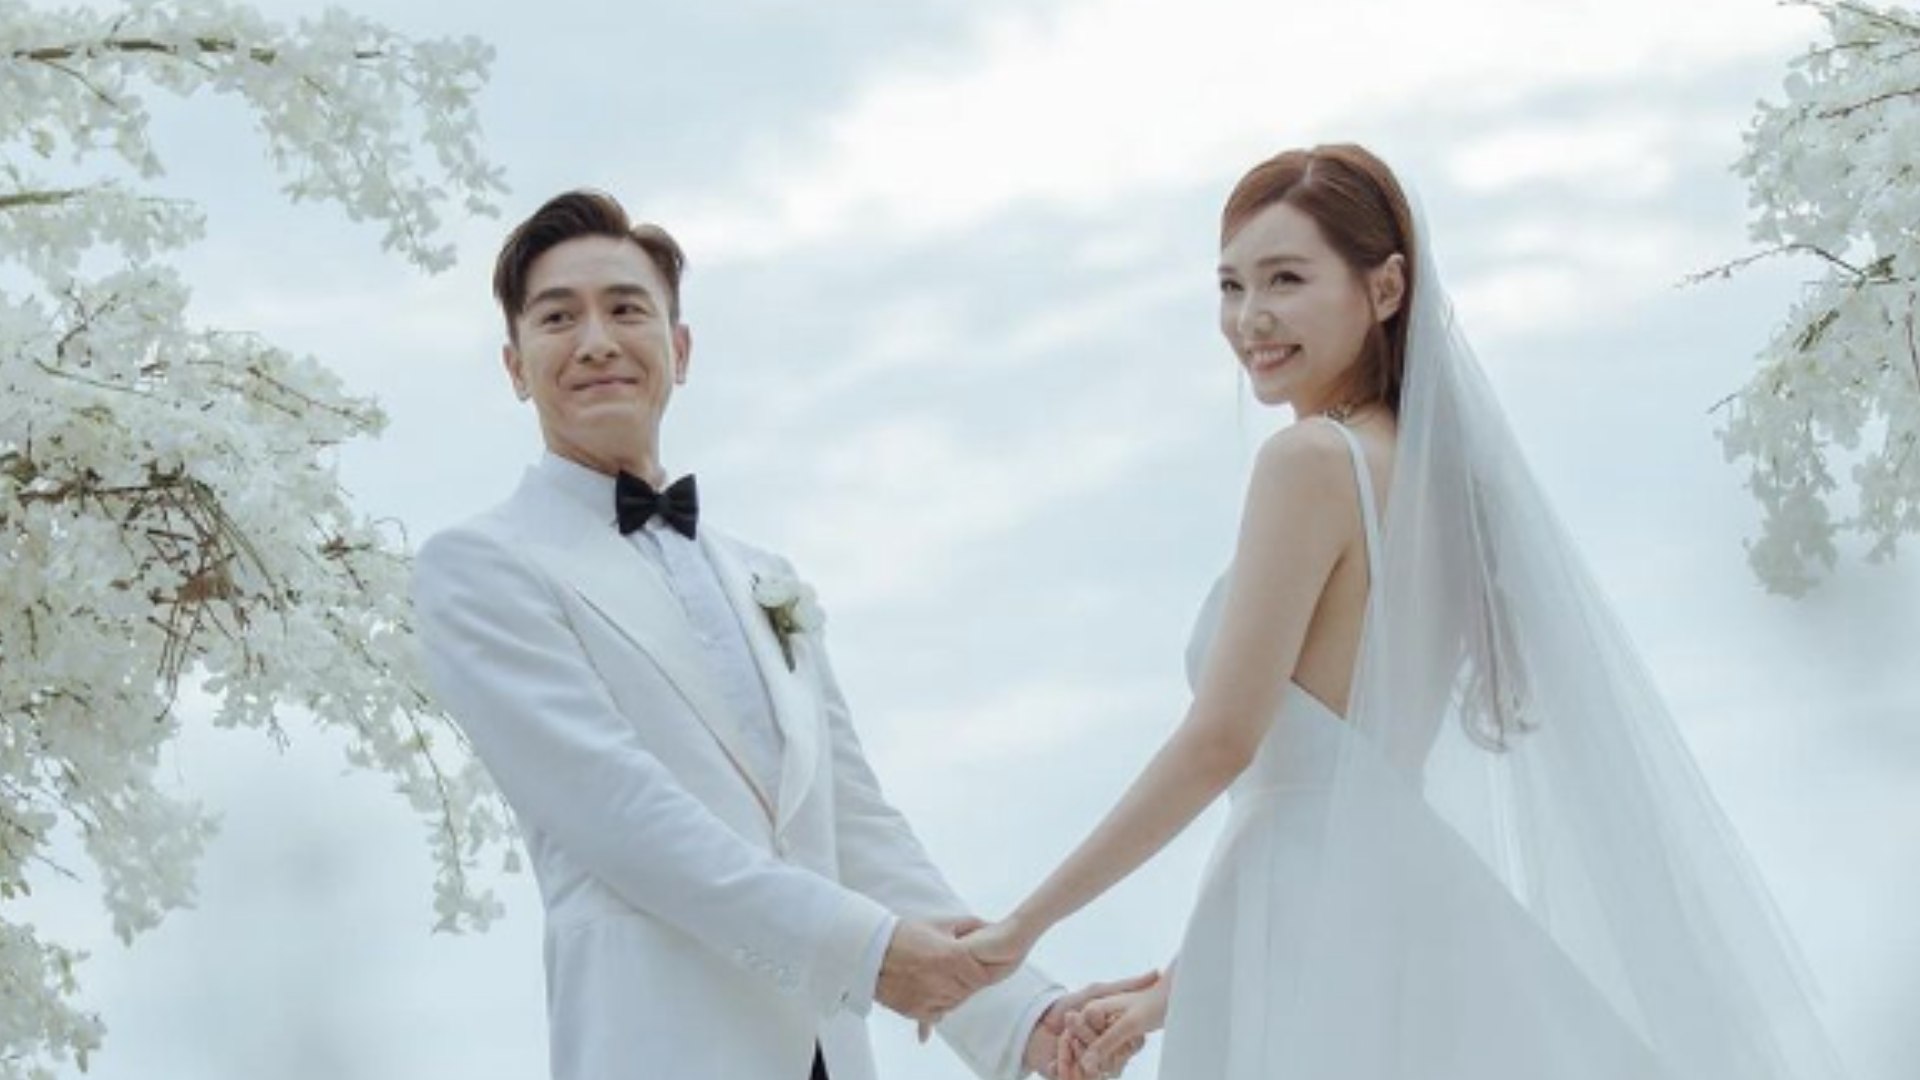 Kenneth Ma and Roxanne Tong are now a married couple!